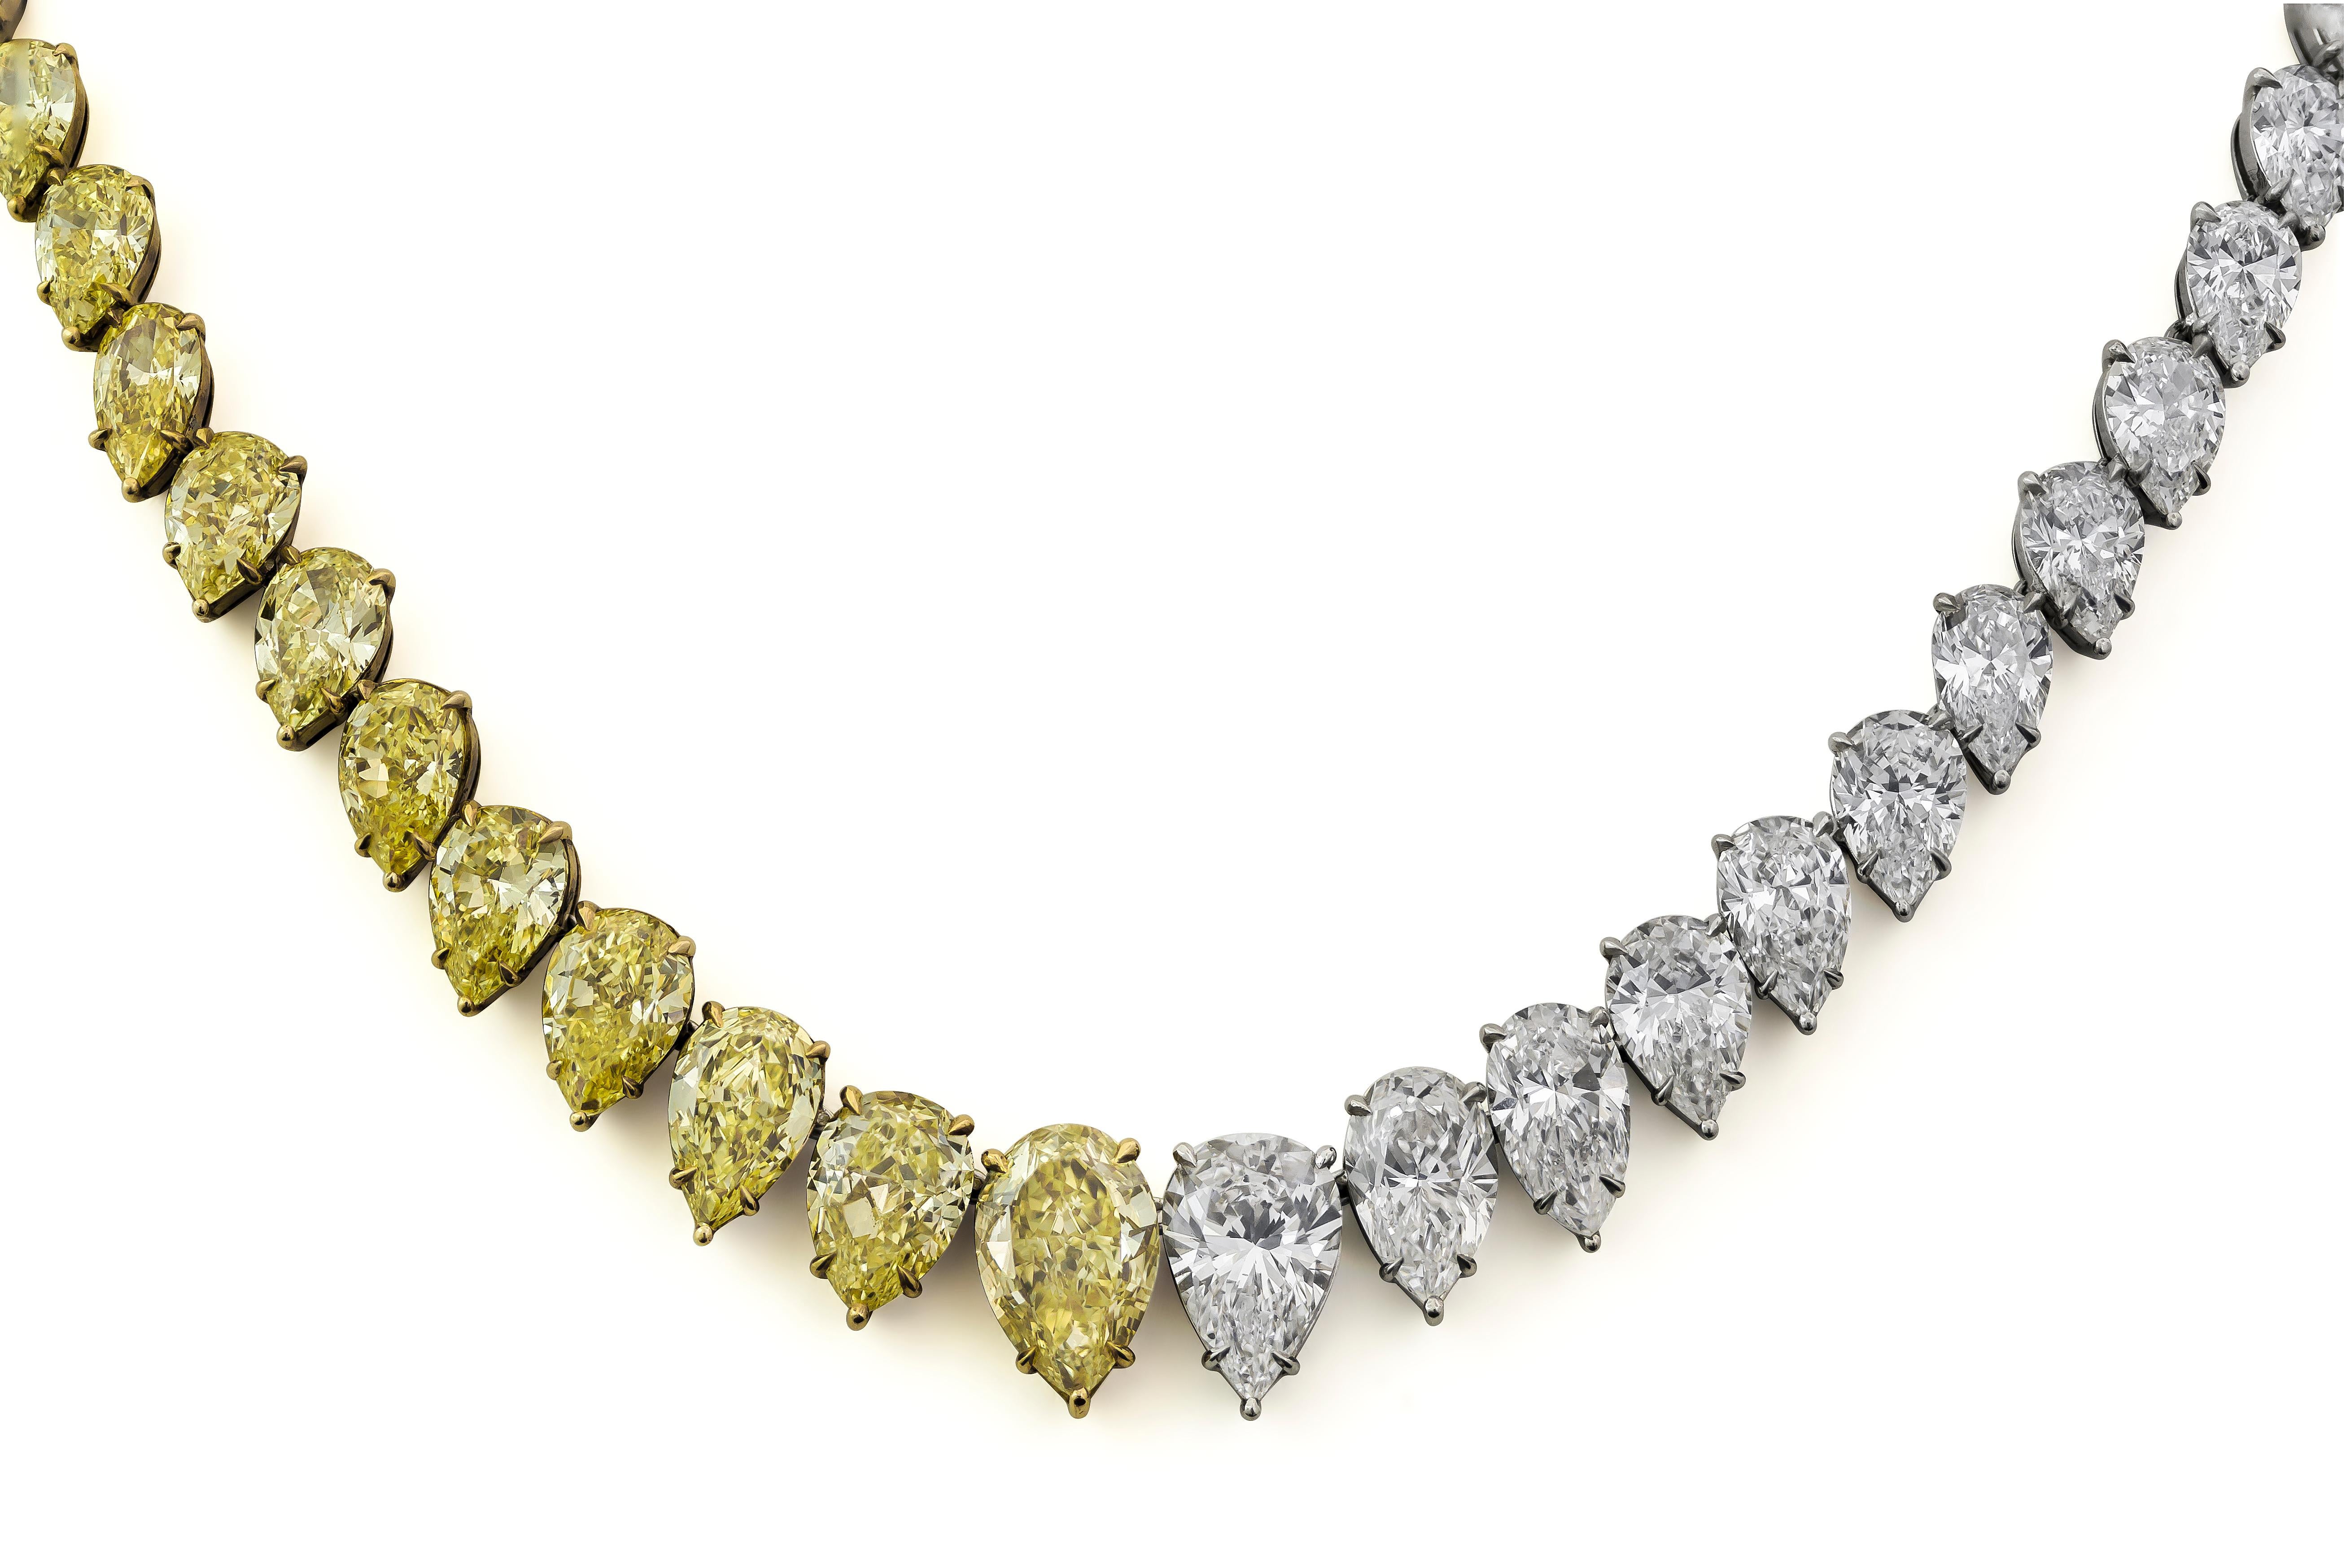 Unique and well crafted piece that showcases the two magnificent sides of diamonds. On one side, features color rich fancy yellow pear shape diamonds that graduates in size, set in five prong 18k yellow gold setting. 28 in total, yellow diamonds